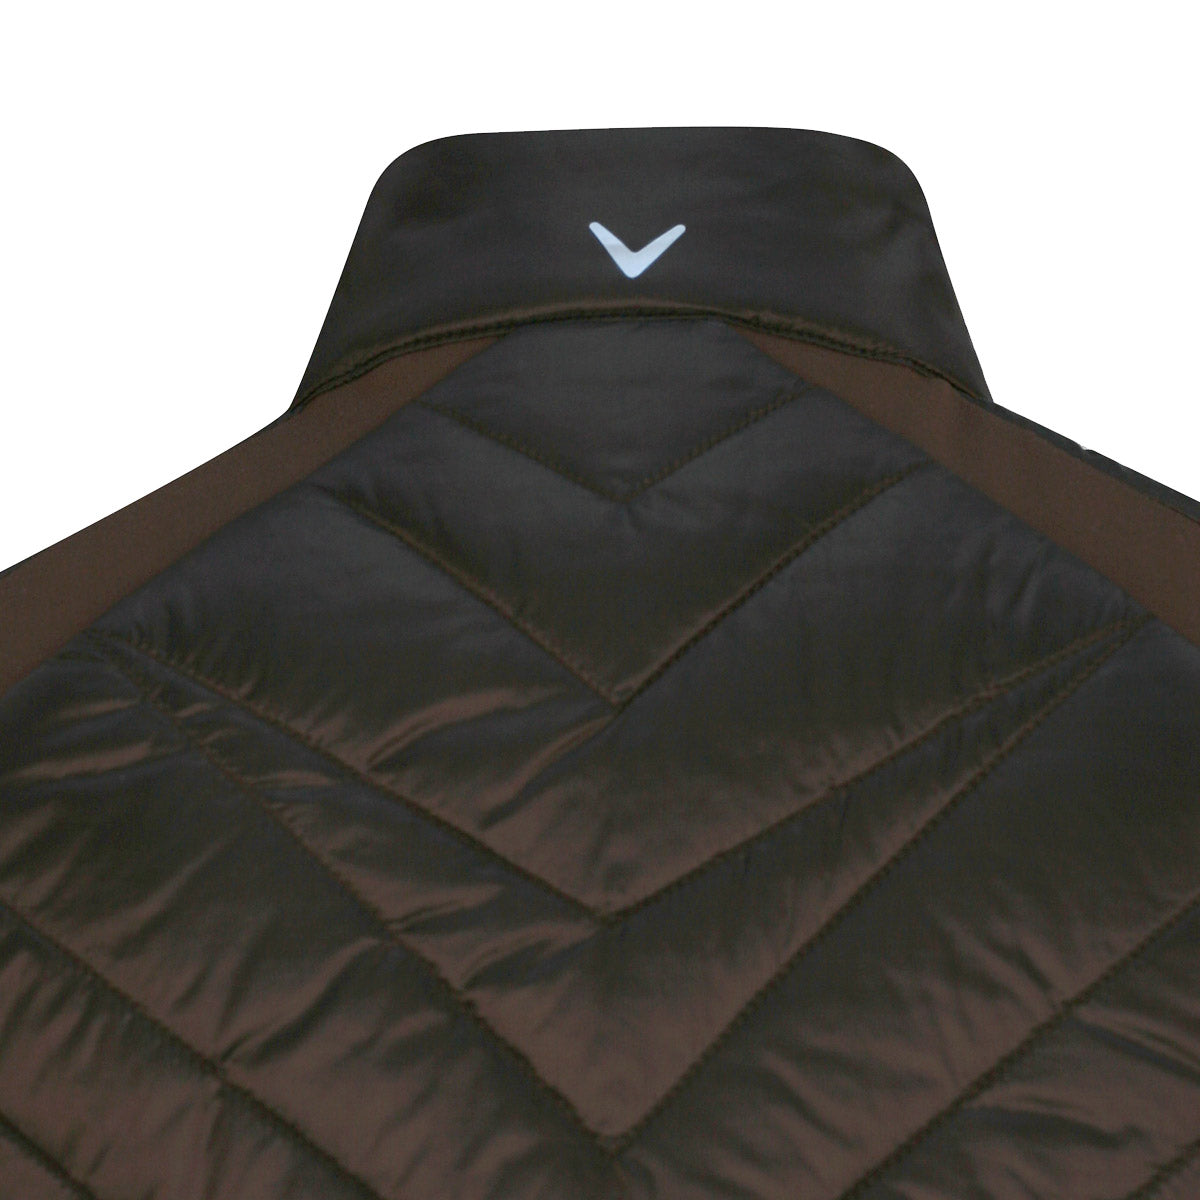 Callaway Ladies Primaloft Lightweight Quilted Gilet in Chicory Coffee